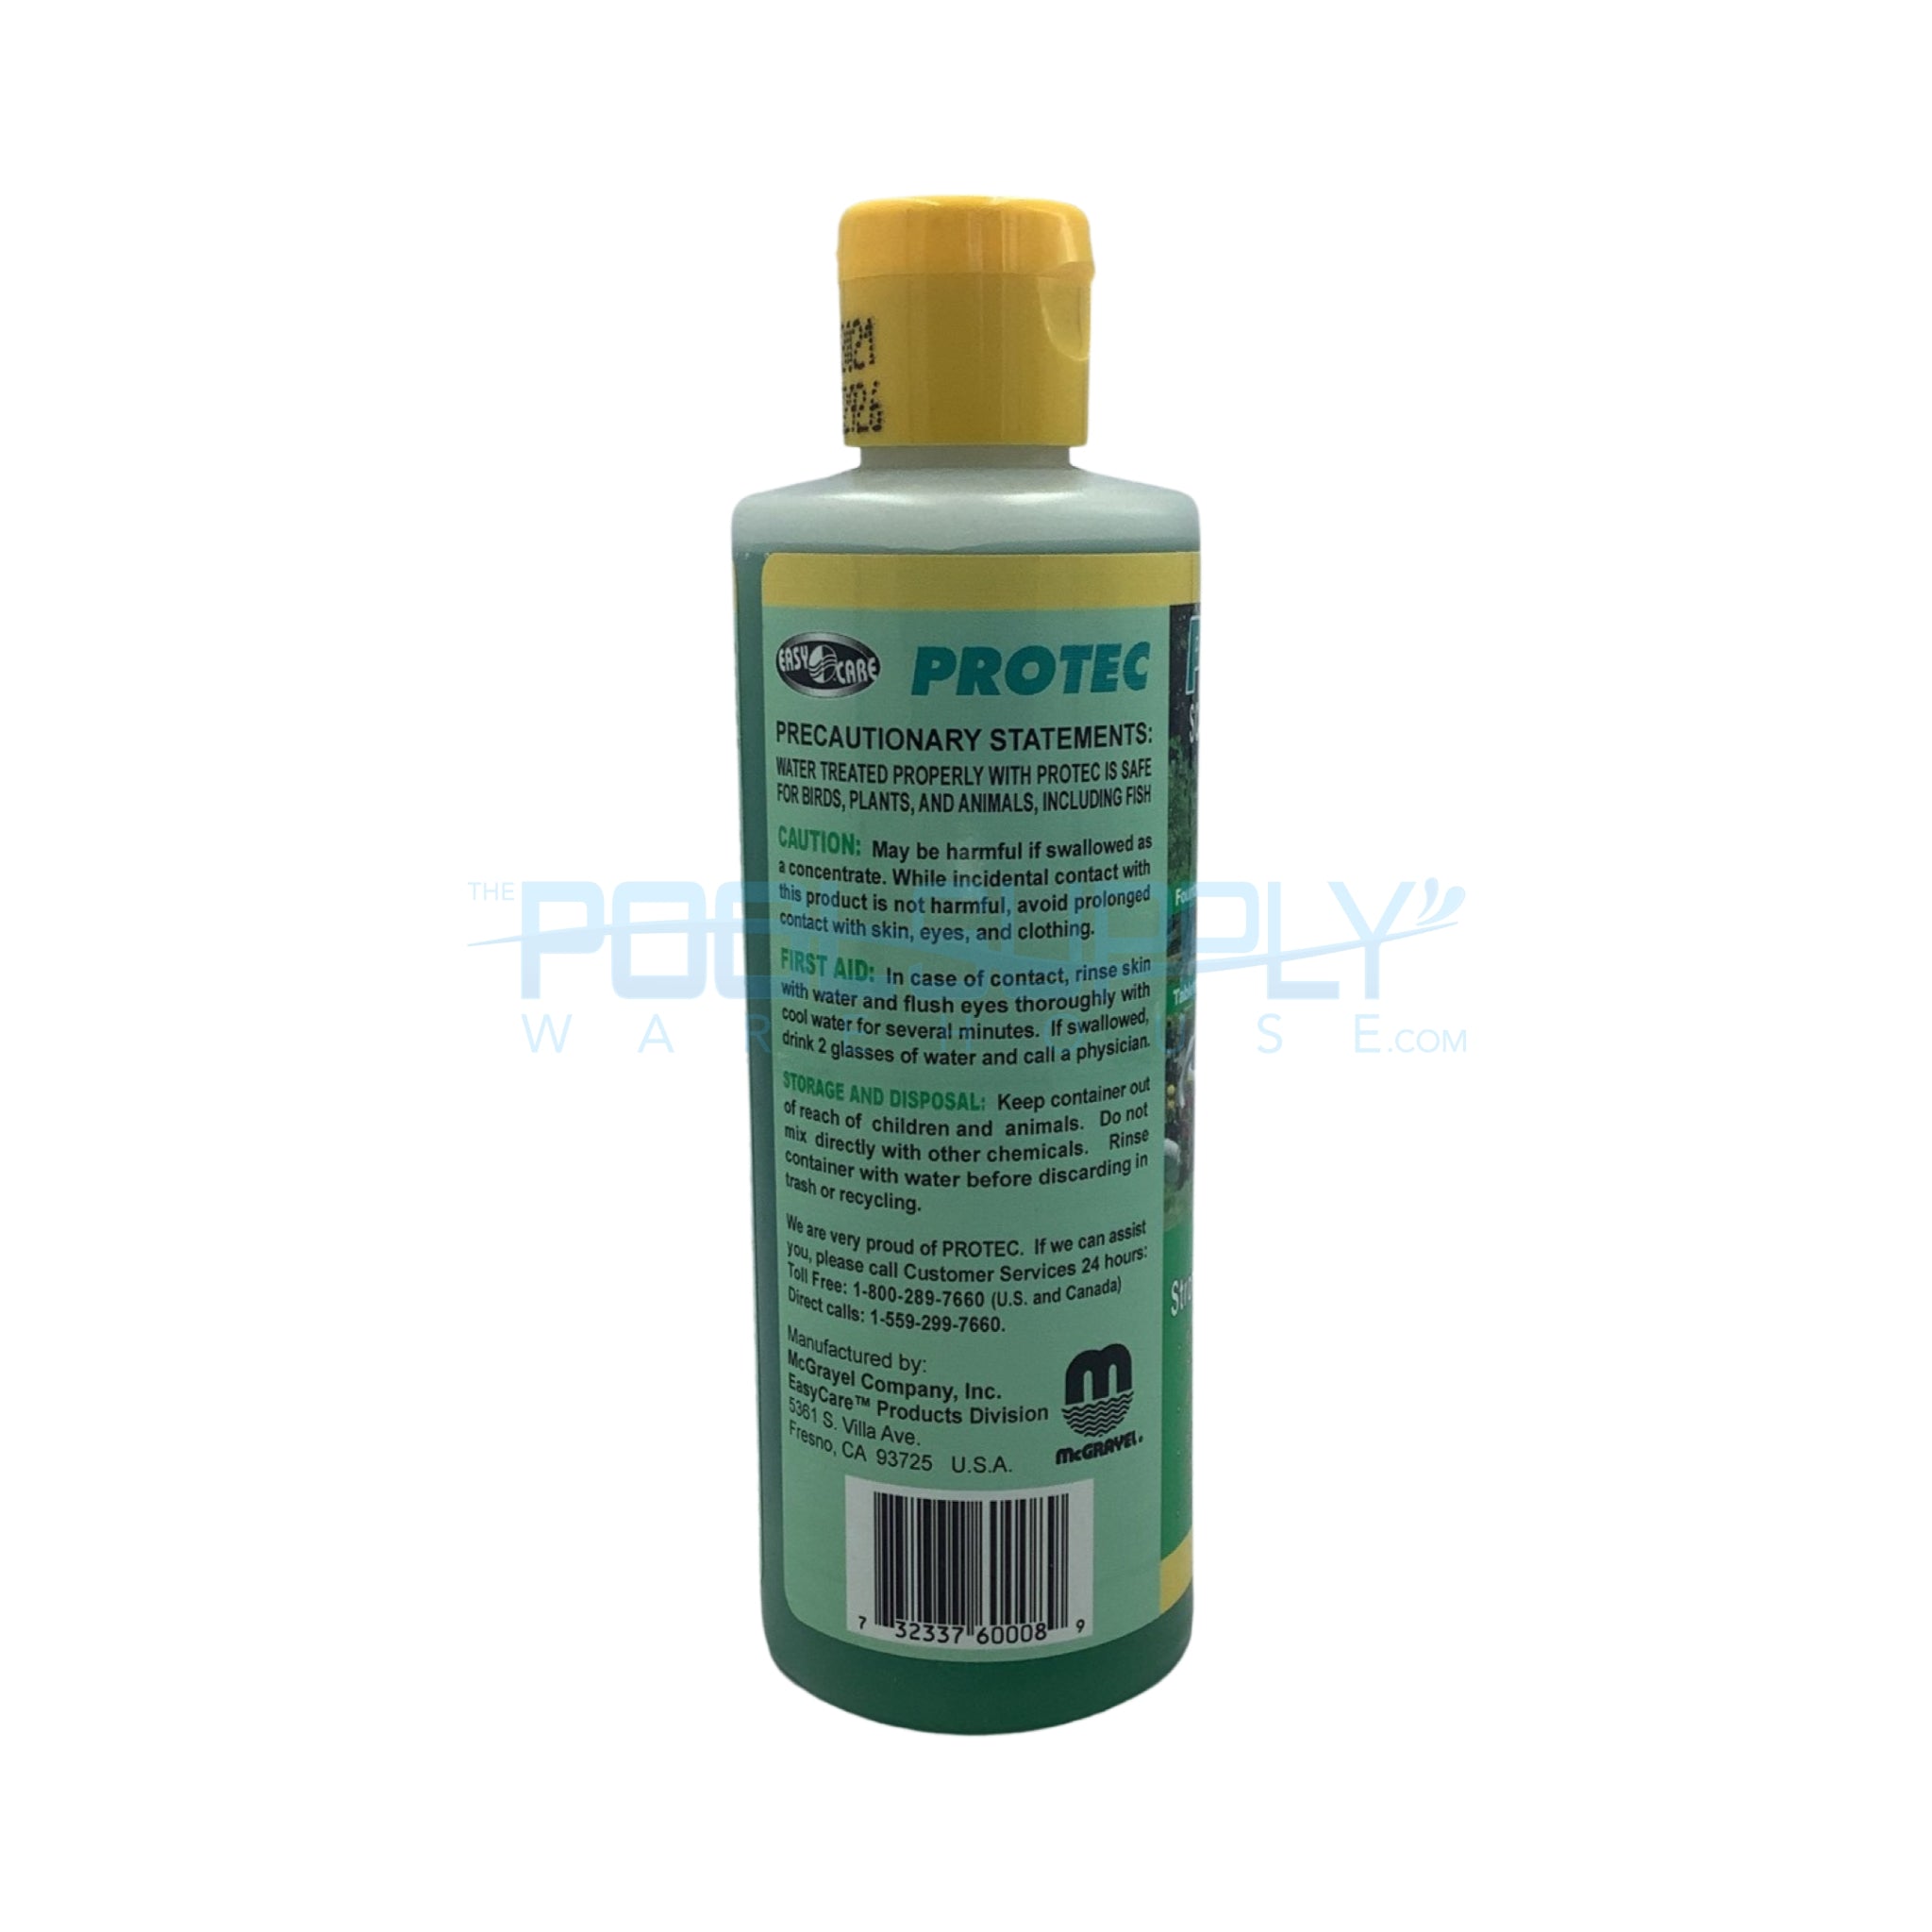 EasyCare Protec - 8 oz - 60008 - The Pool Supply Warehouse